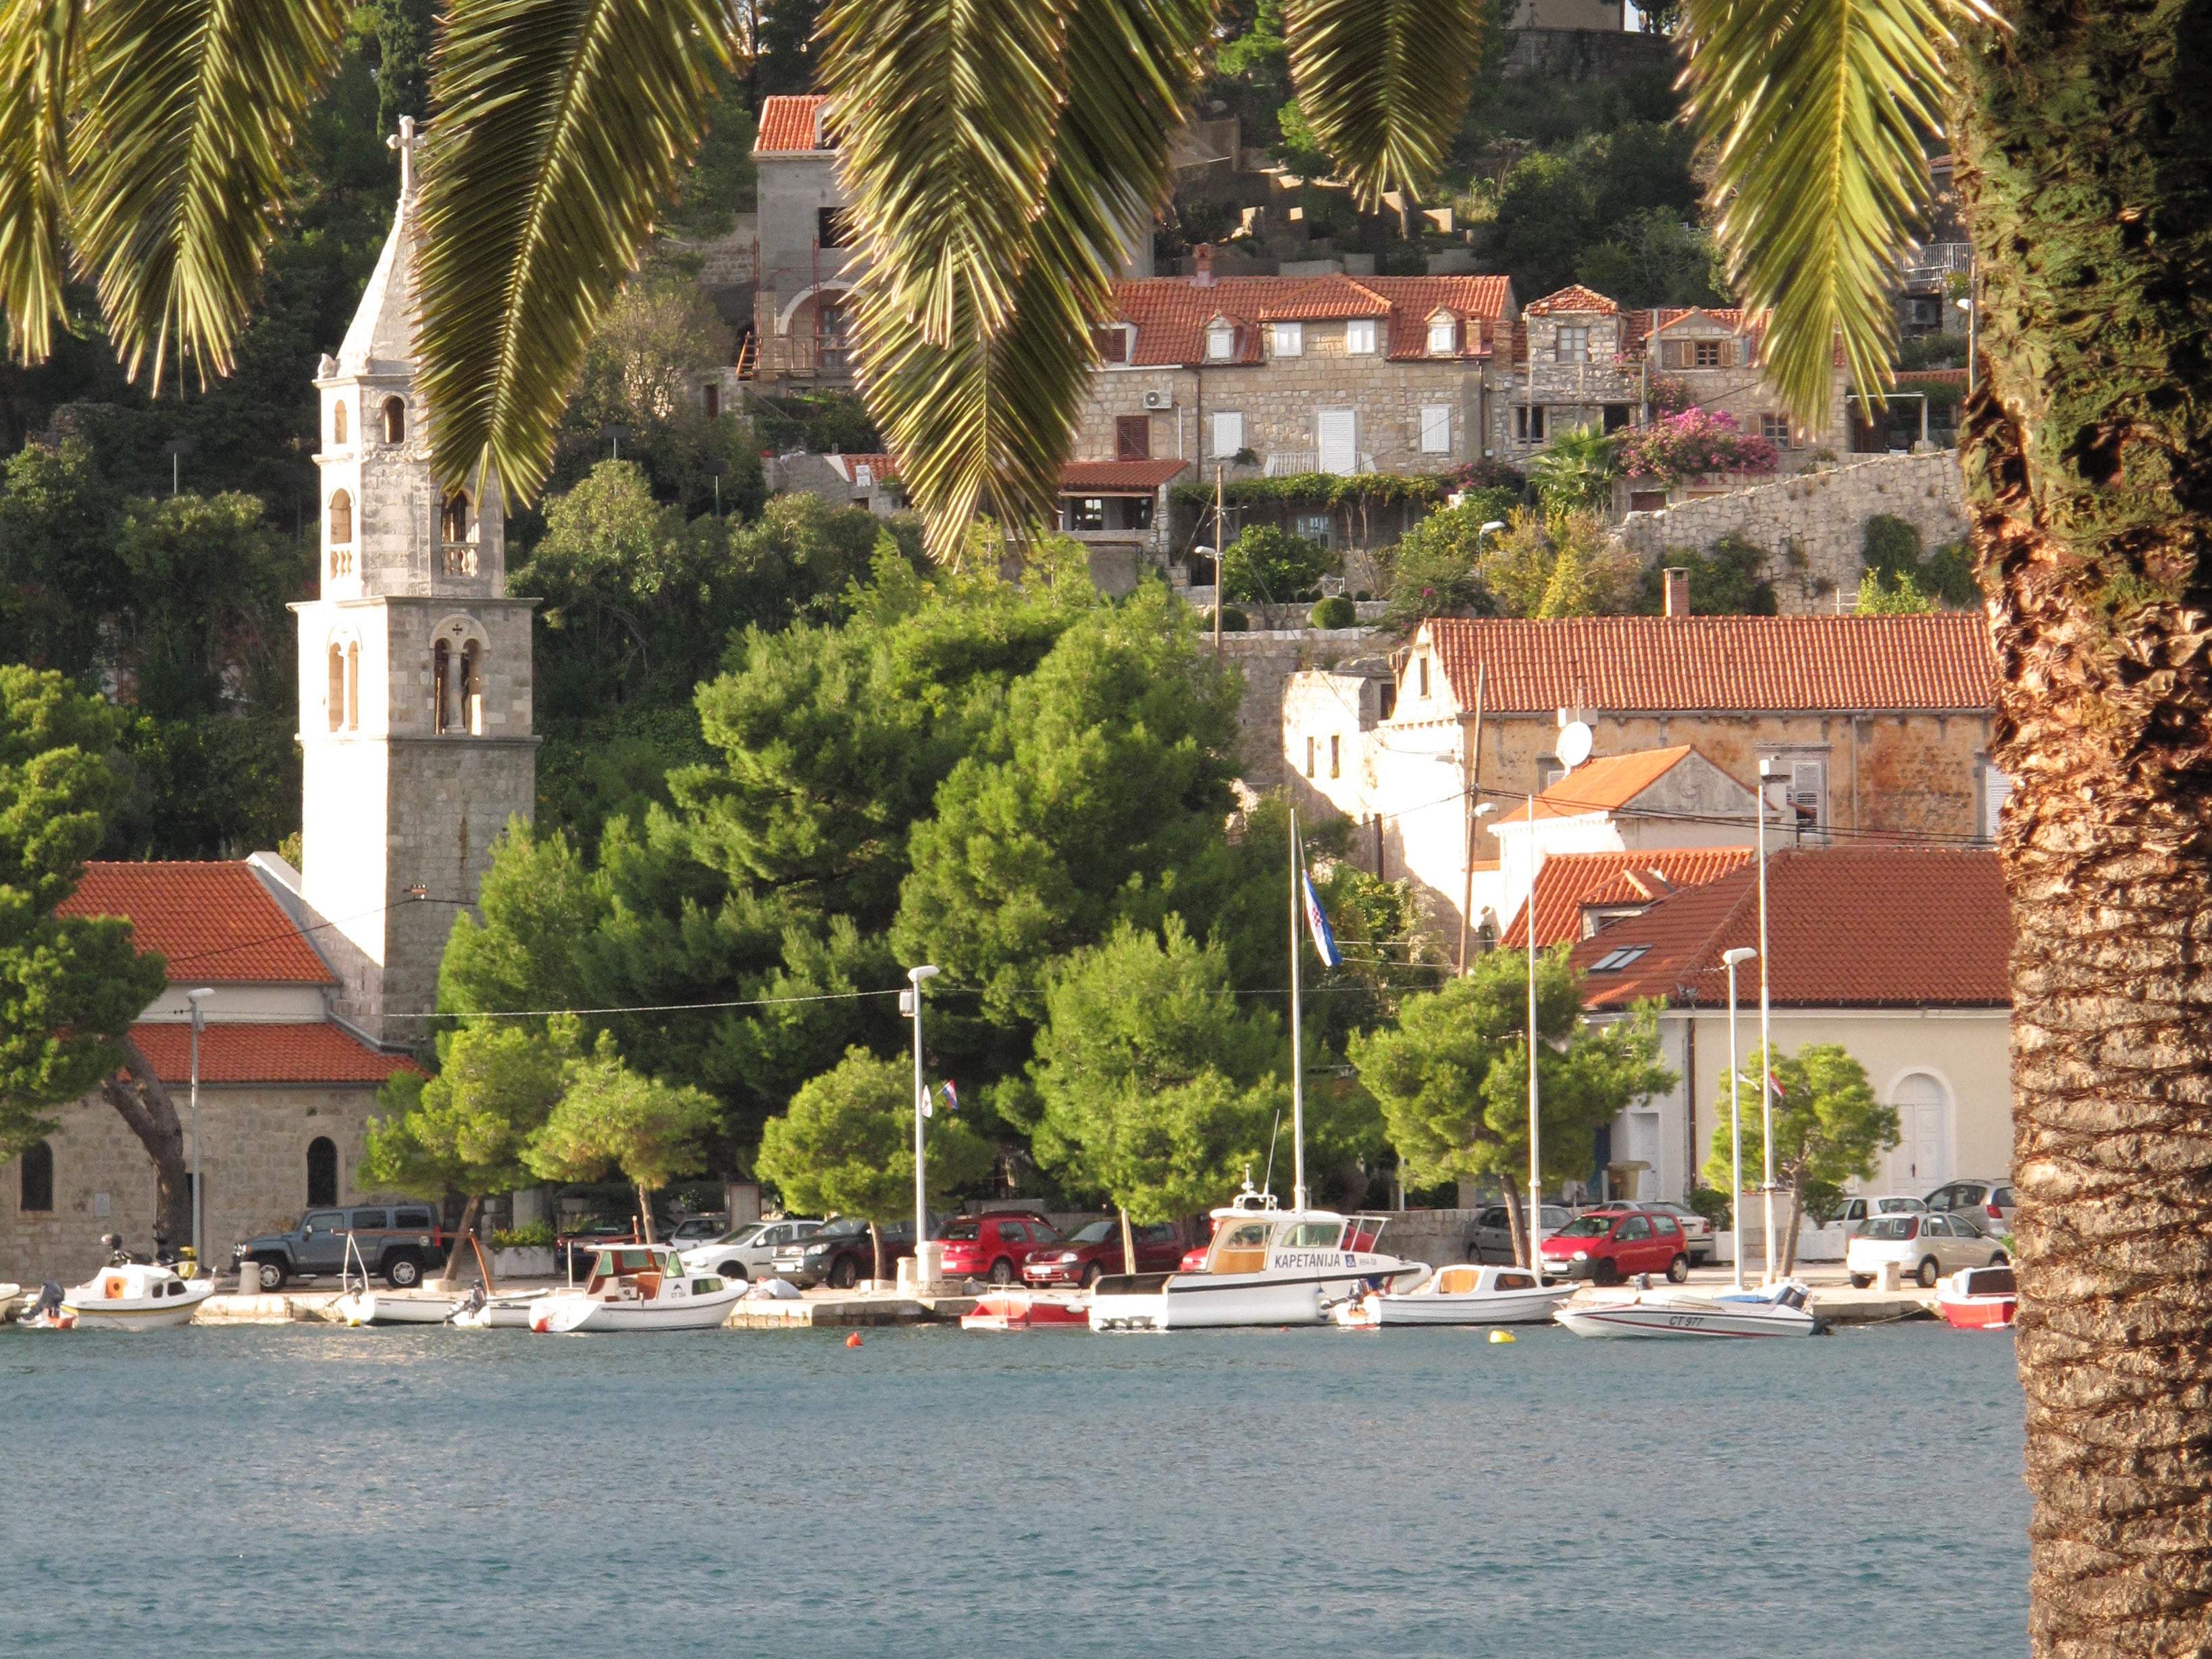 Happier times: late summer in southern Croatia